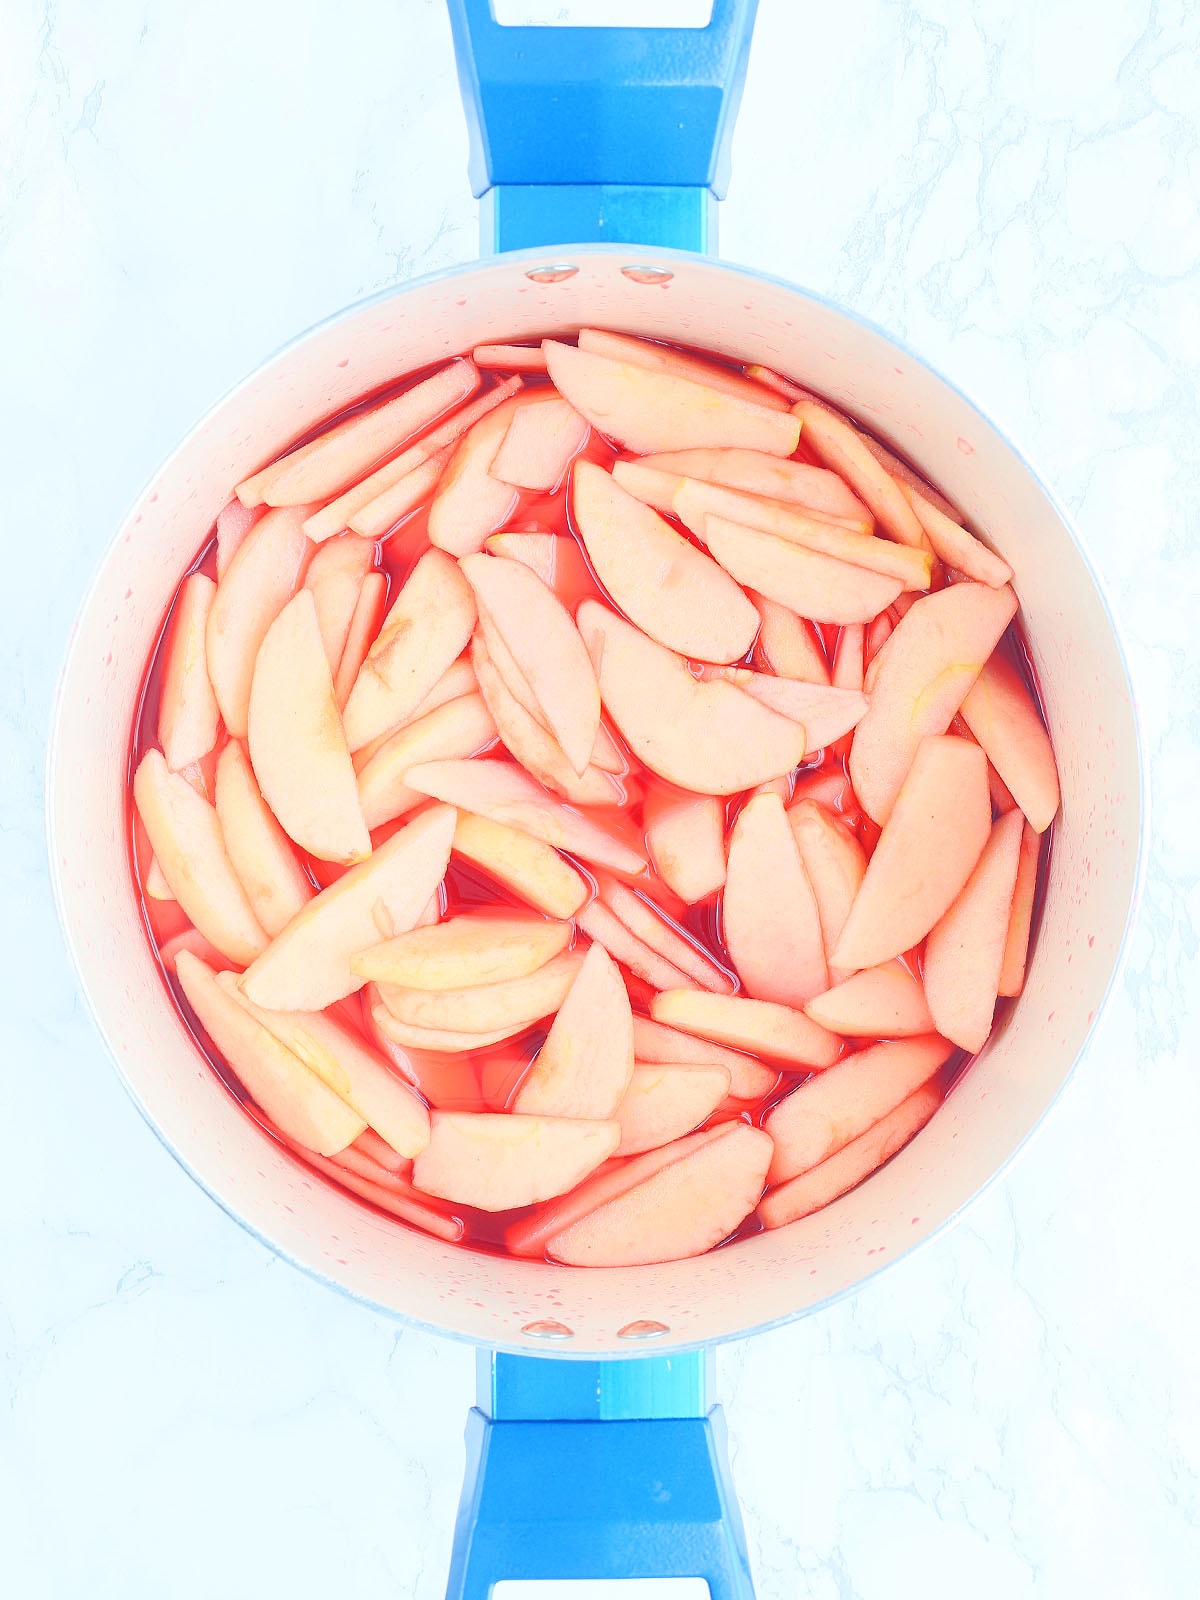 Sliced apples in a stock pot after being added to the Red Hots candy syrup.